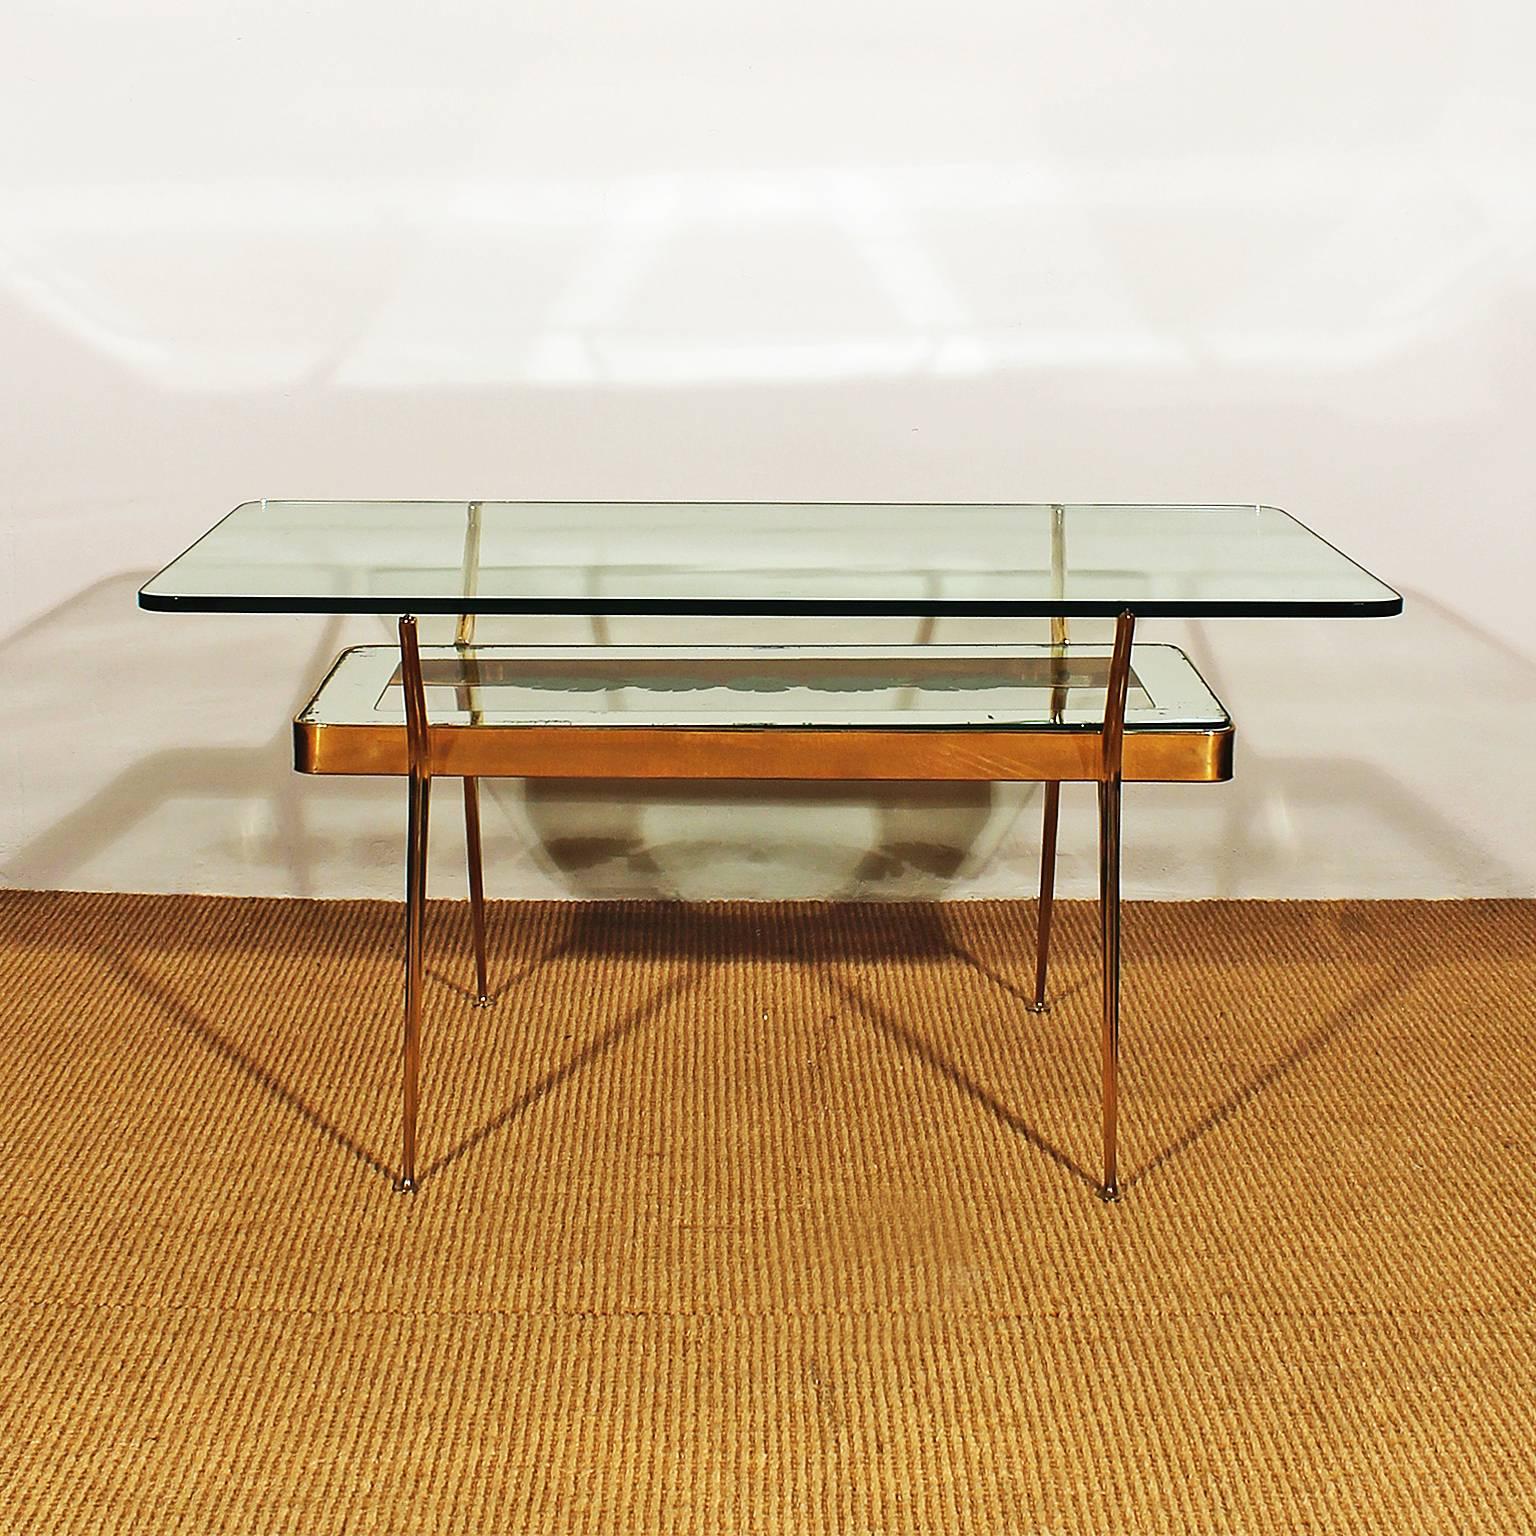 Polished brass coffee table, etching glass and mirror, thick glass from origin on top.
Italy c. 1950